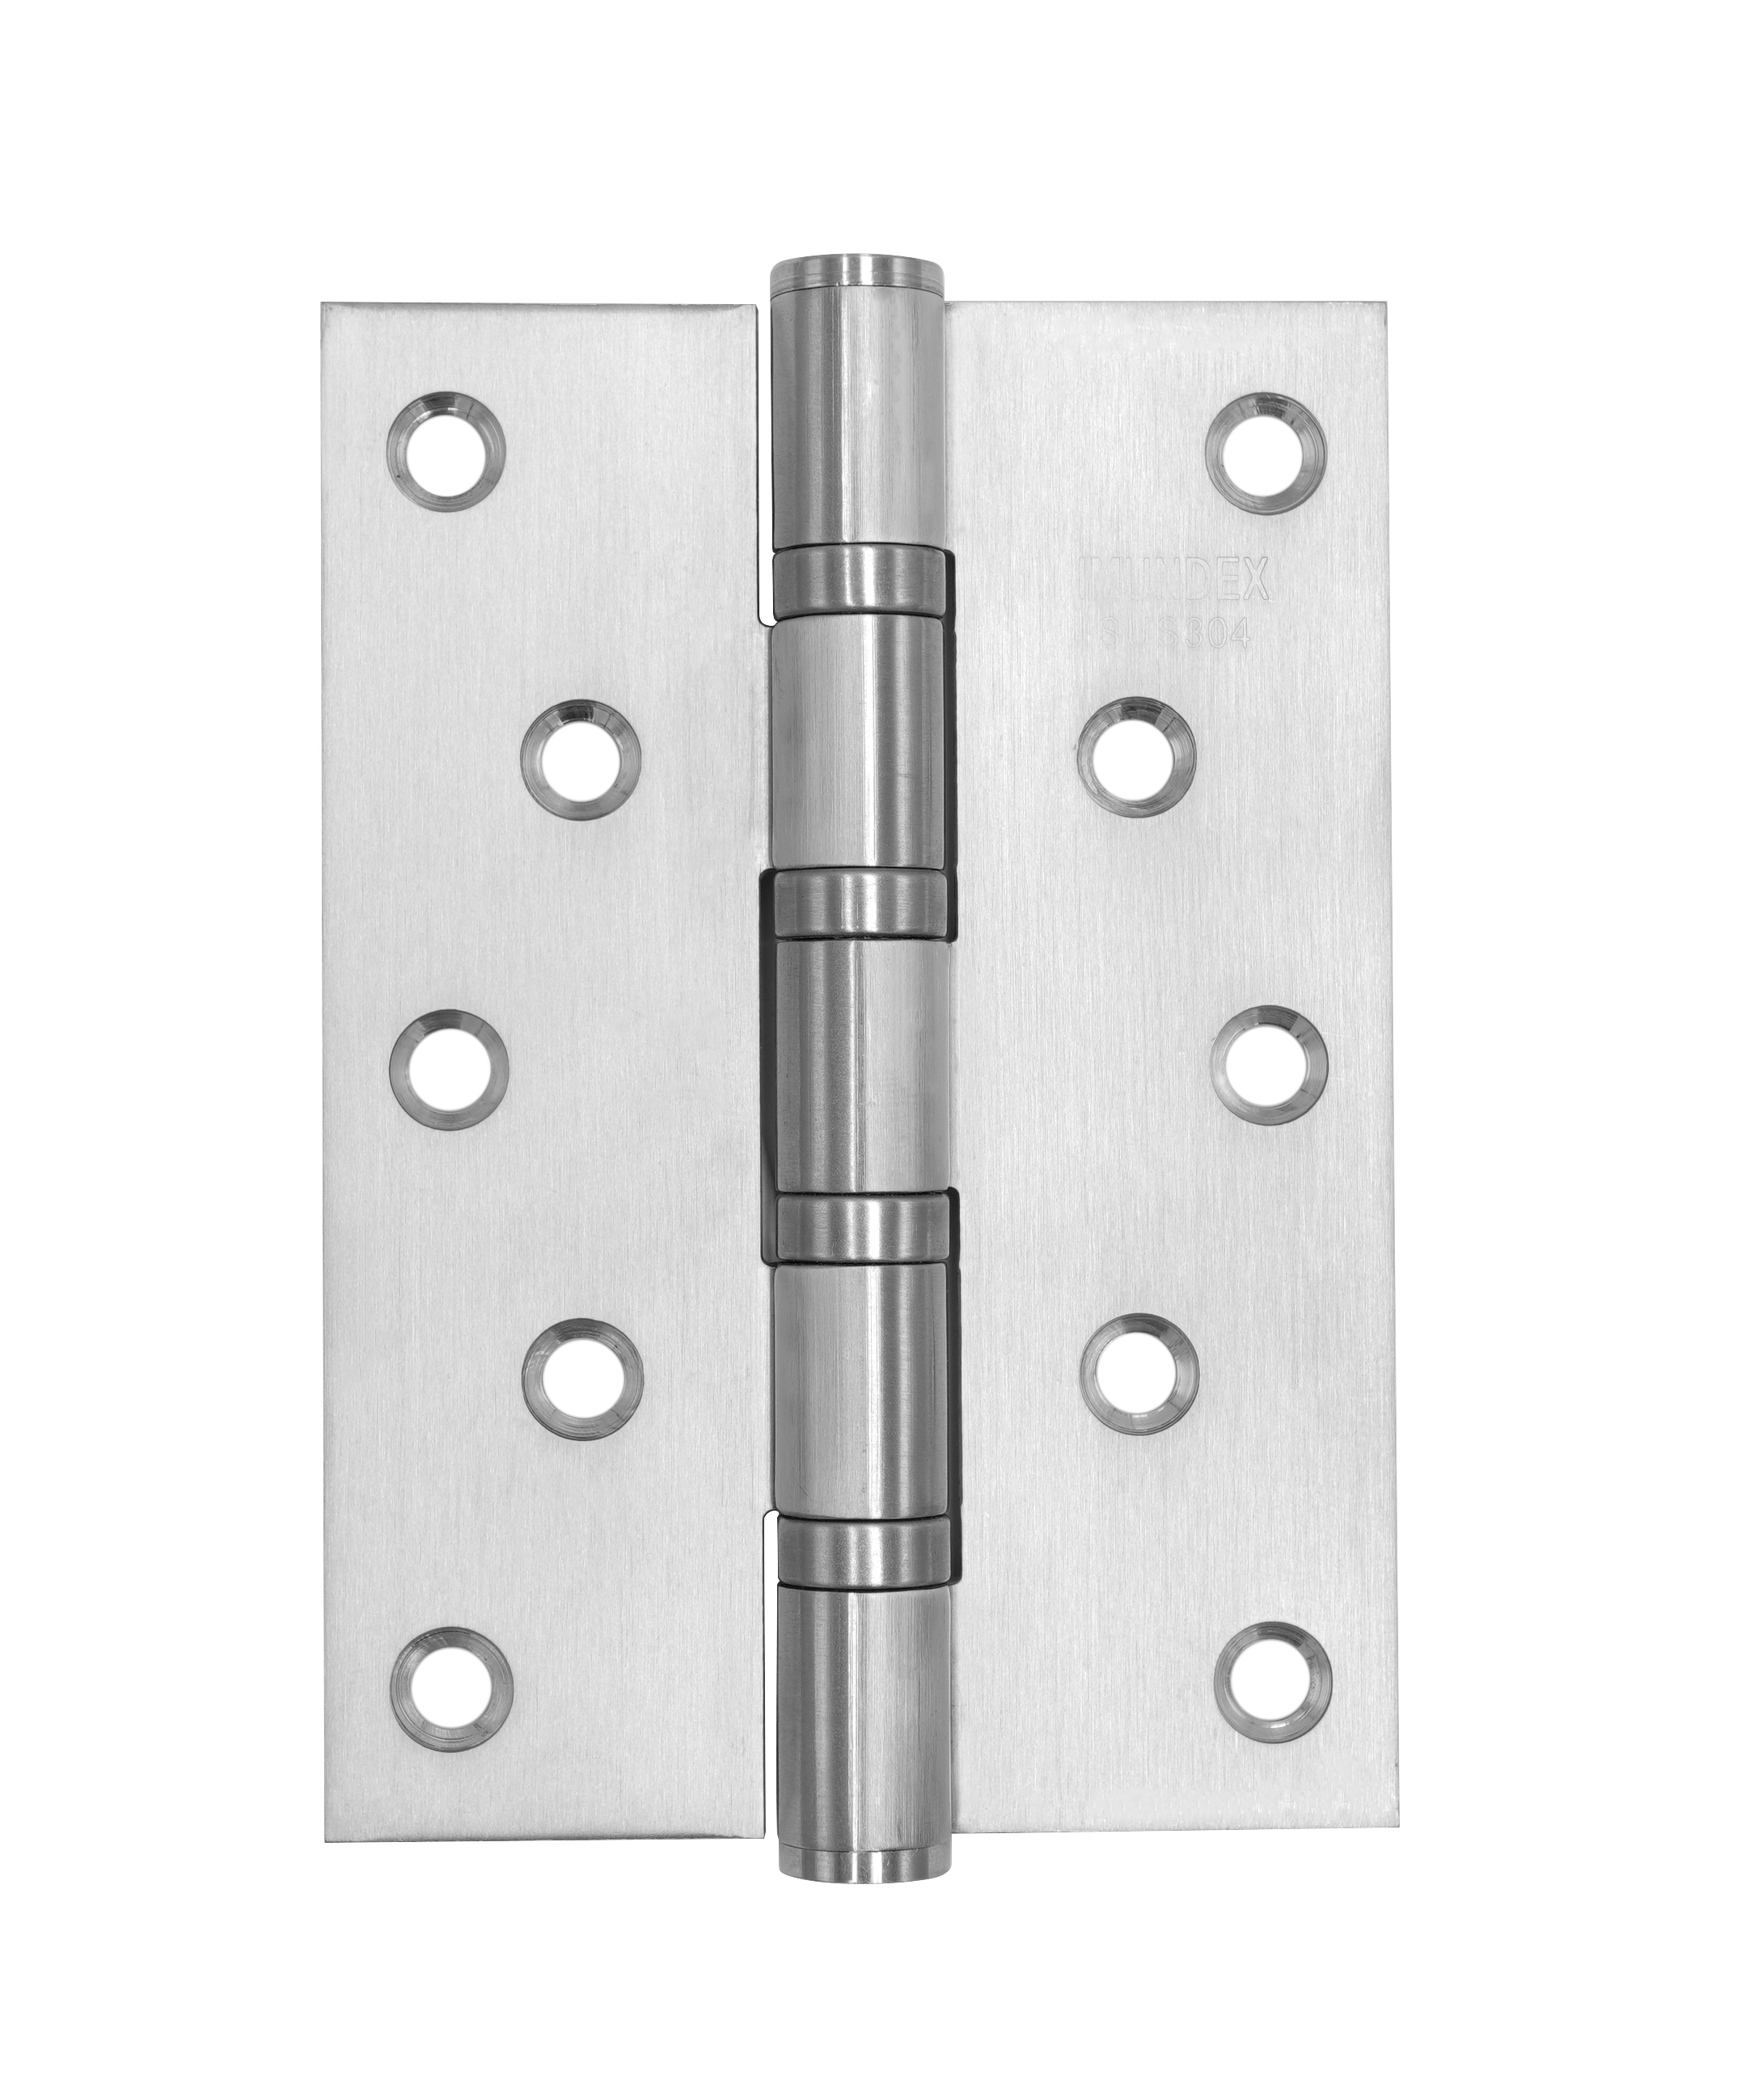 Ball bearing hinges with large size - 2BB - Inox 304